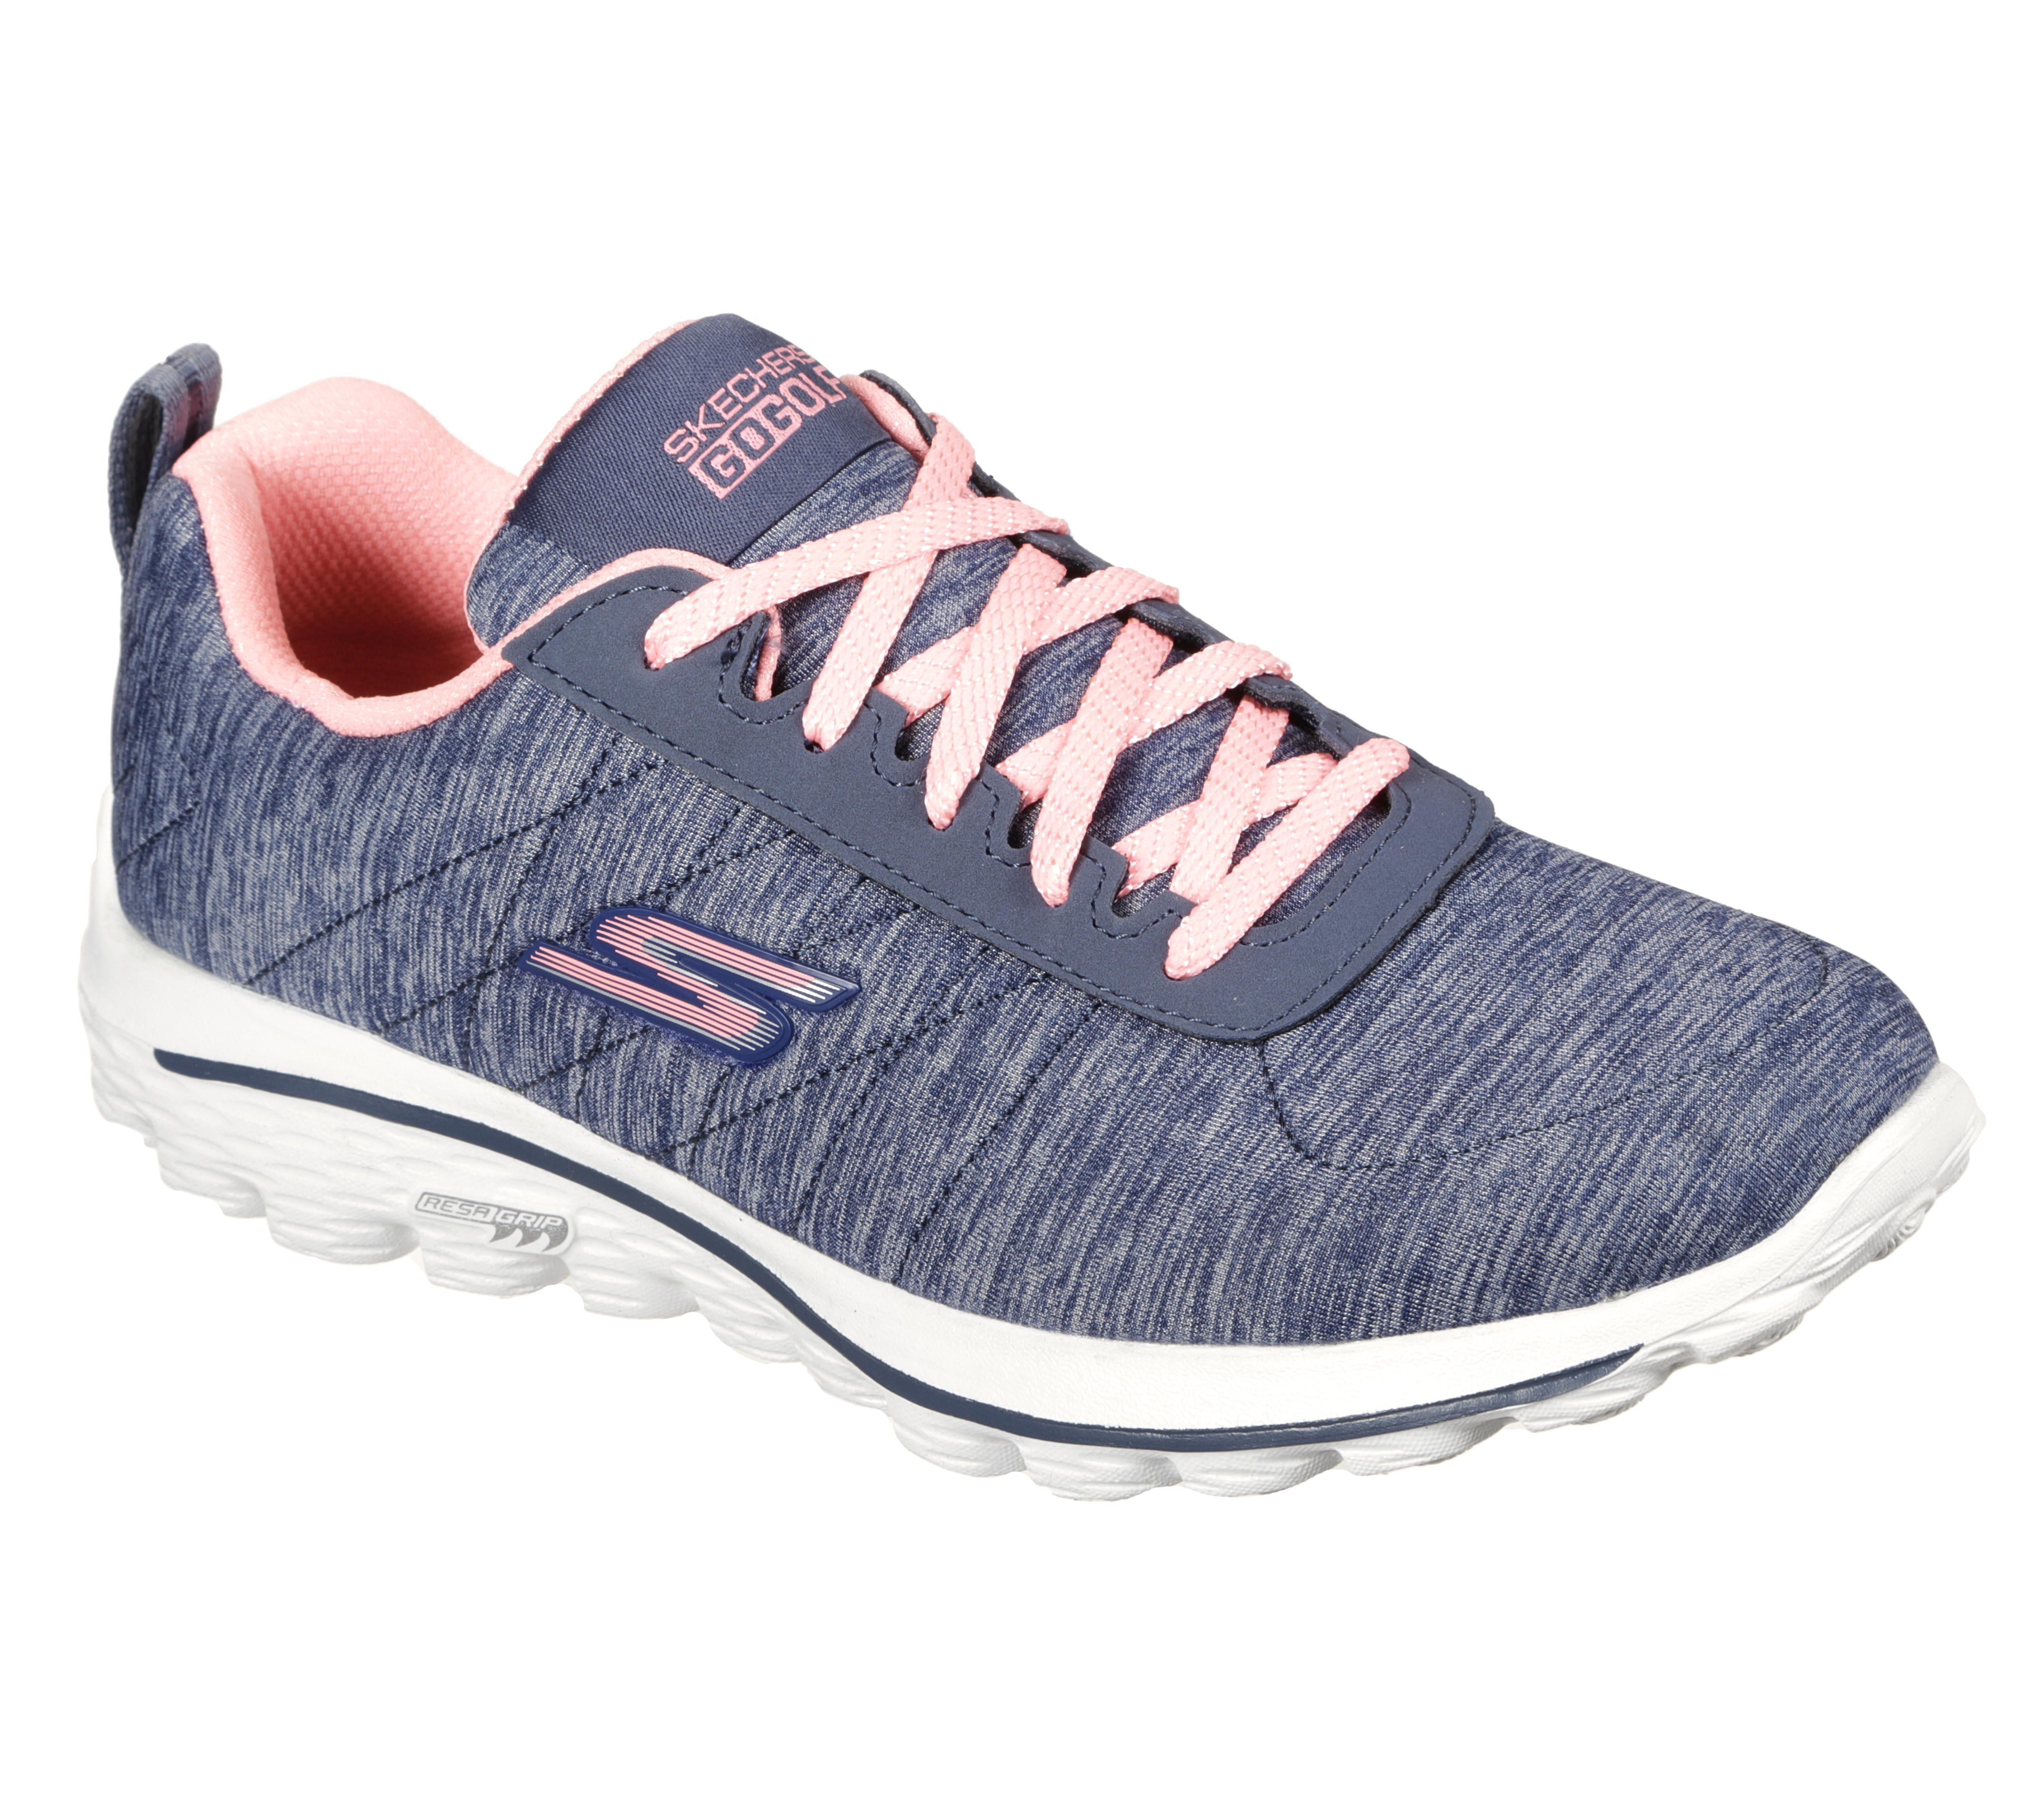 skechers wide relaxed fit golf shoes